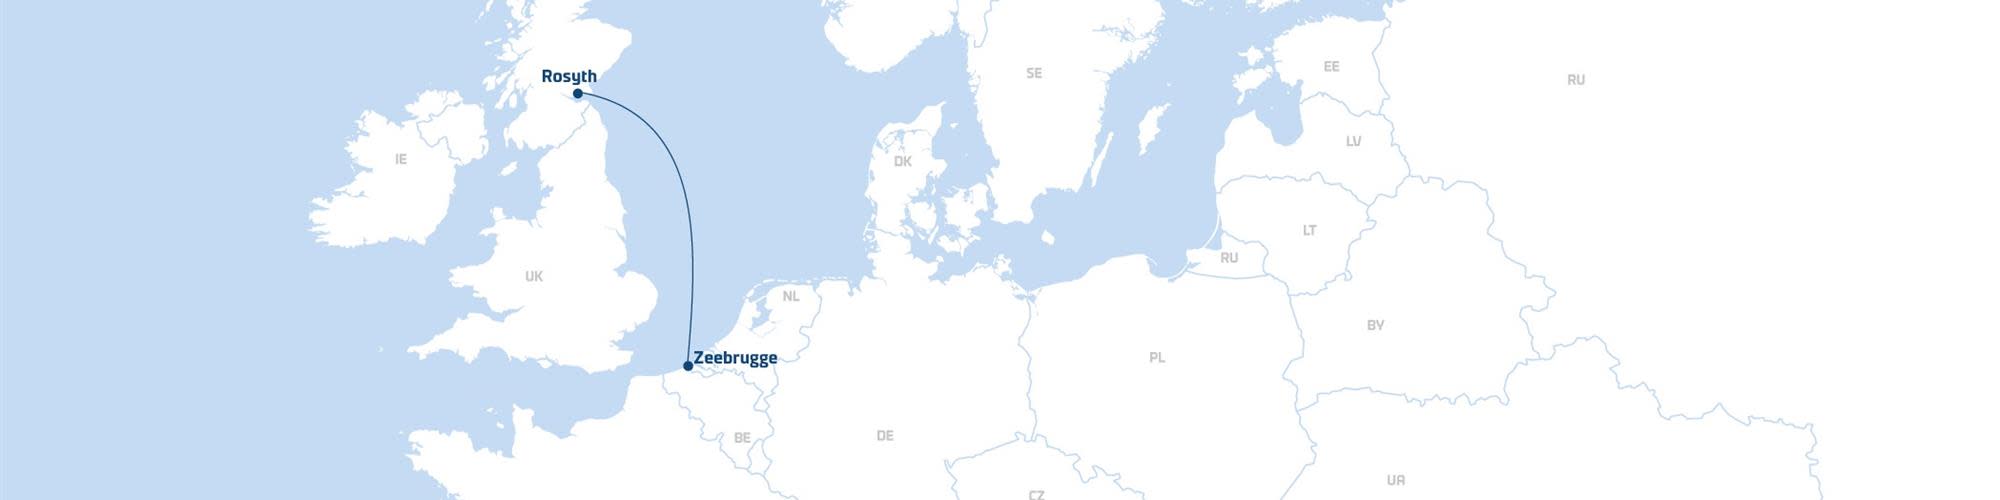 dfds-rosyth-zeebrugge-hero route map